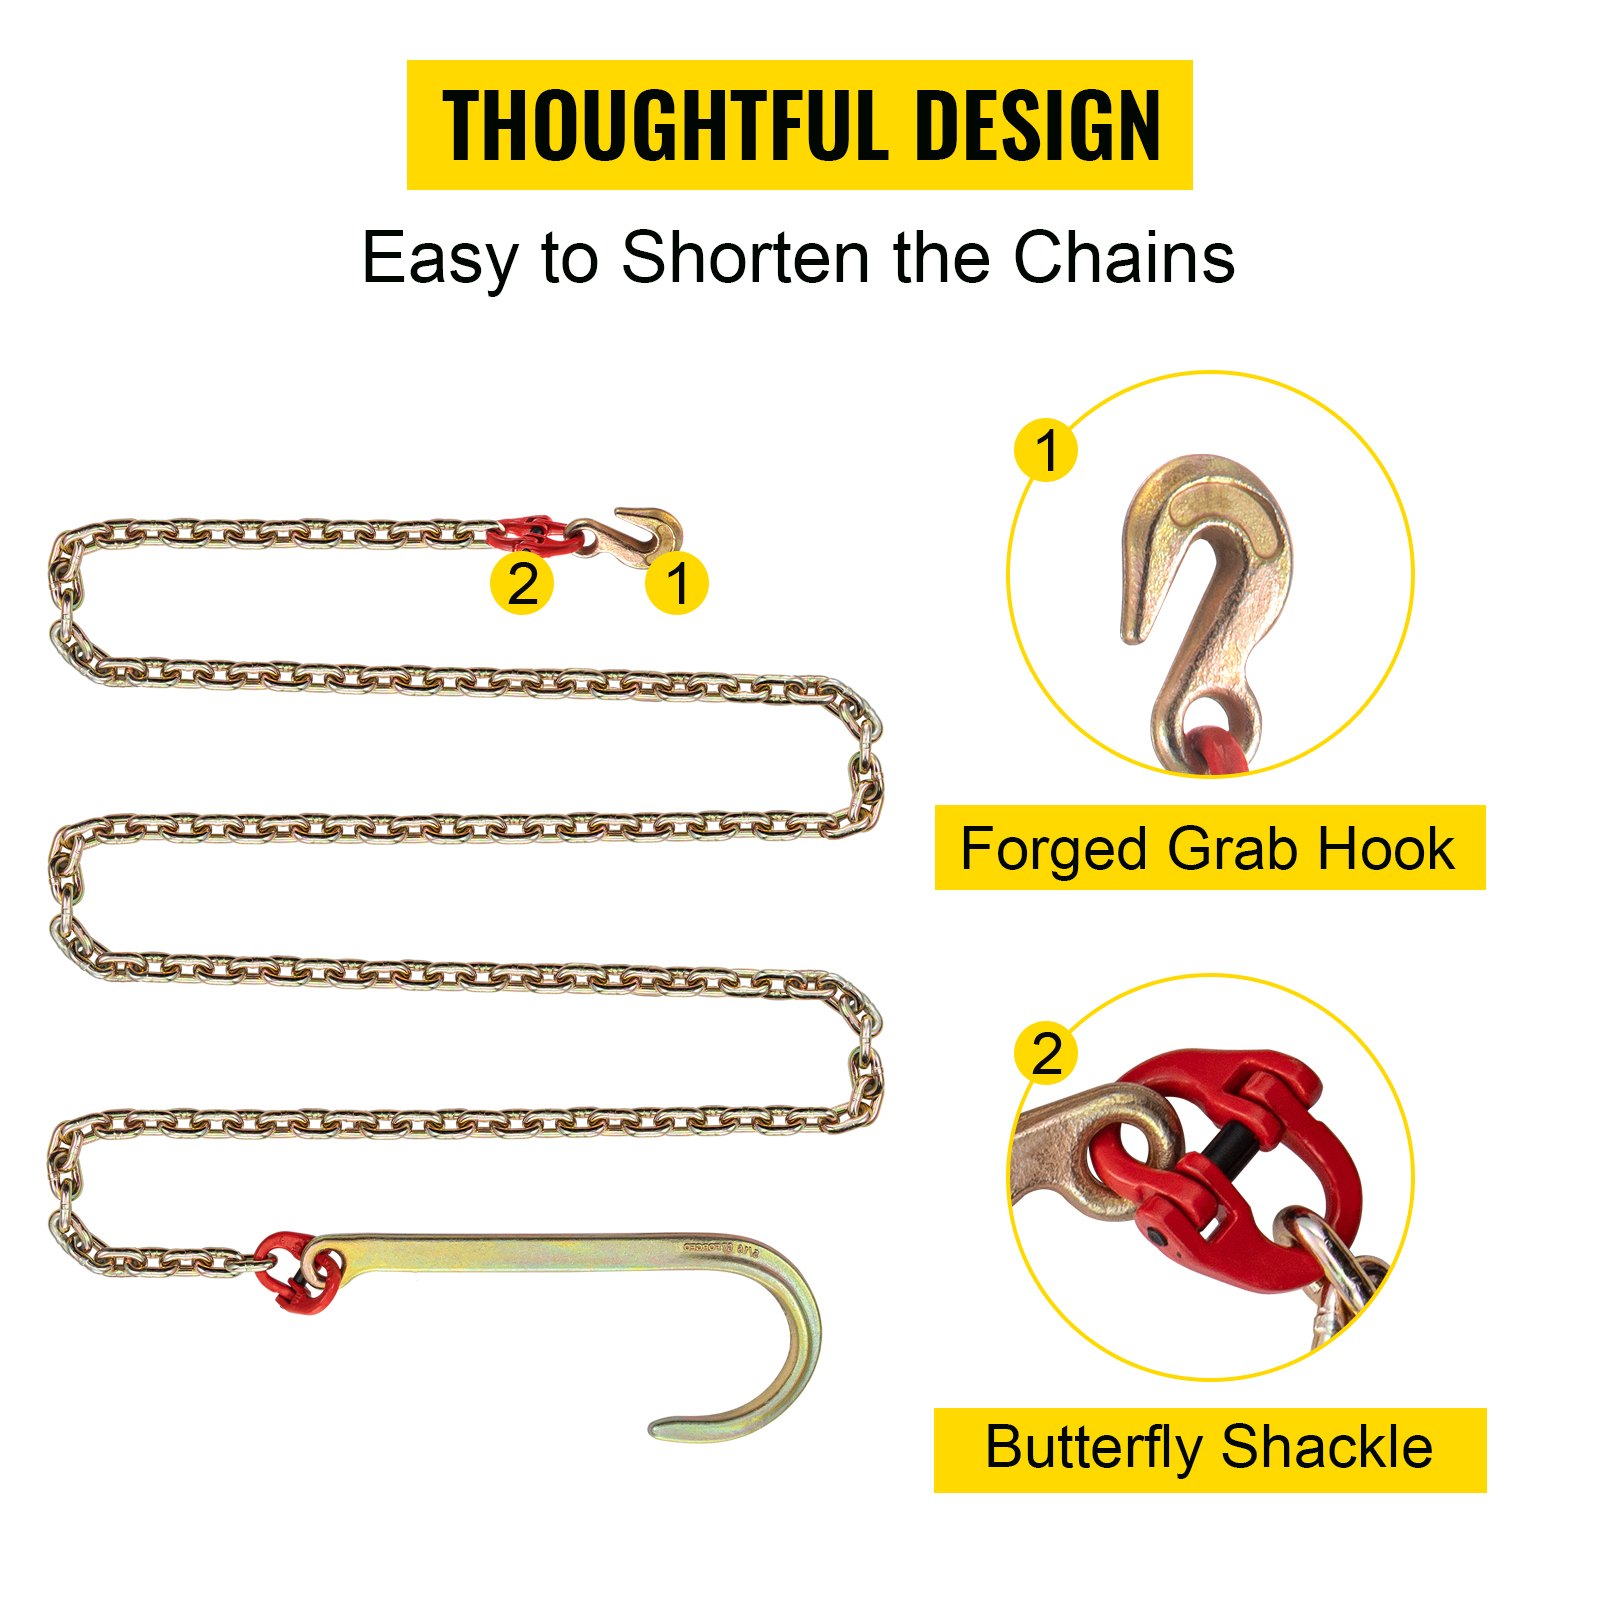 VEVOR J Hook Chain, 5/16 in x 10 ft Tow Chain Bridle, Grade 80 J